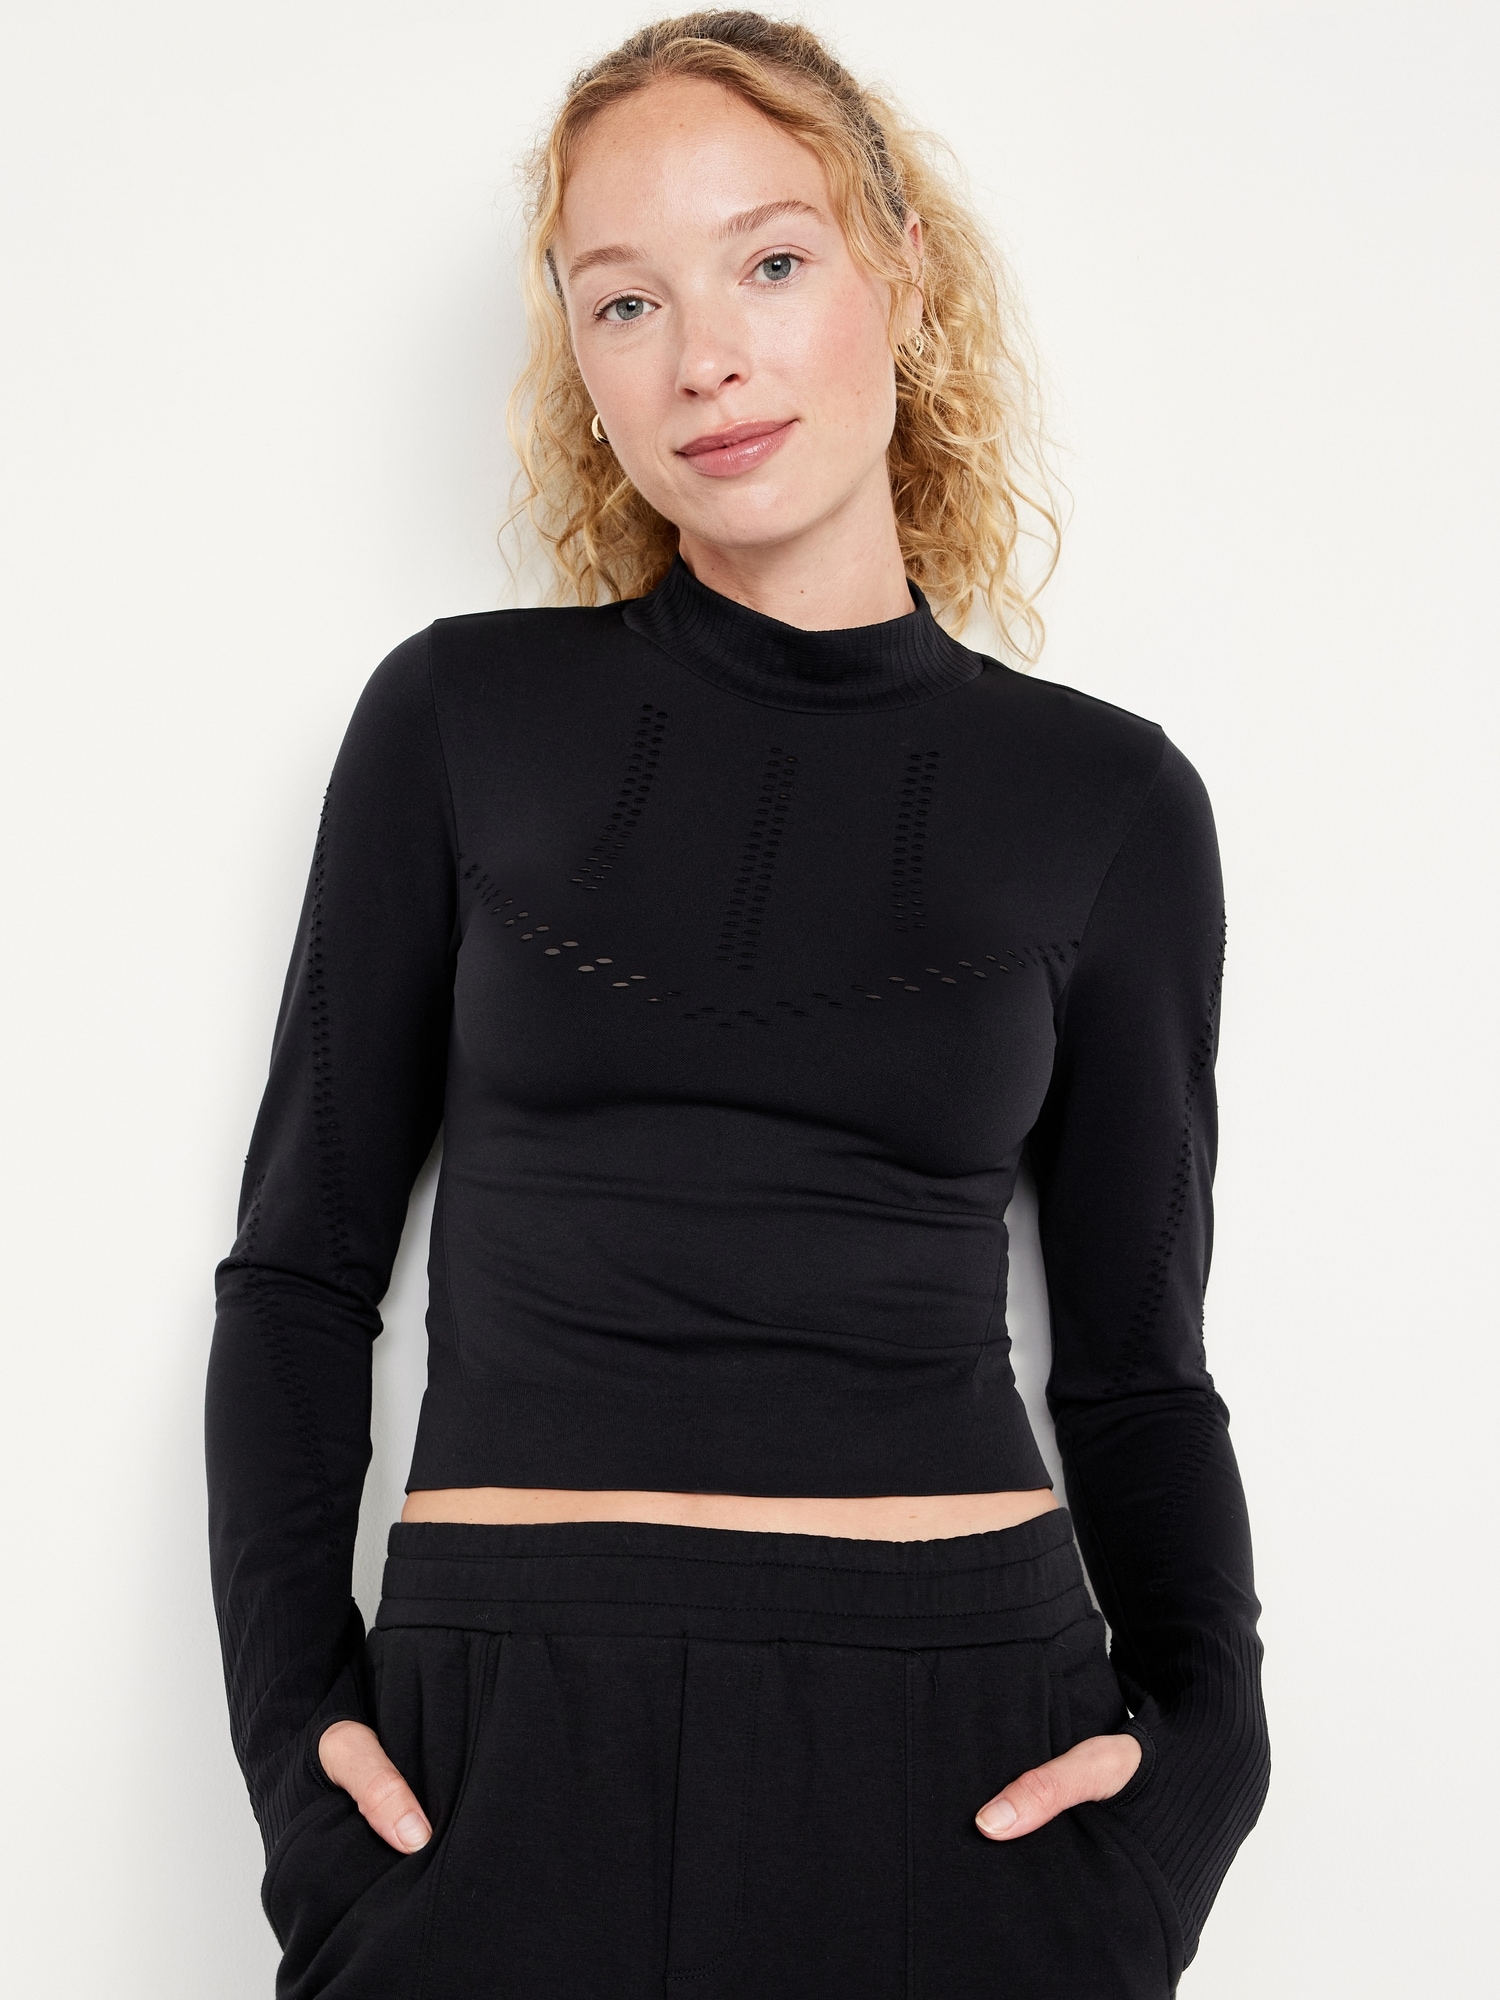 Seamless Cropped Performance Top for Women | Old Navy